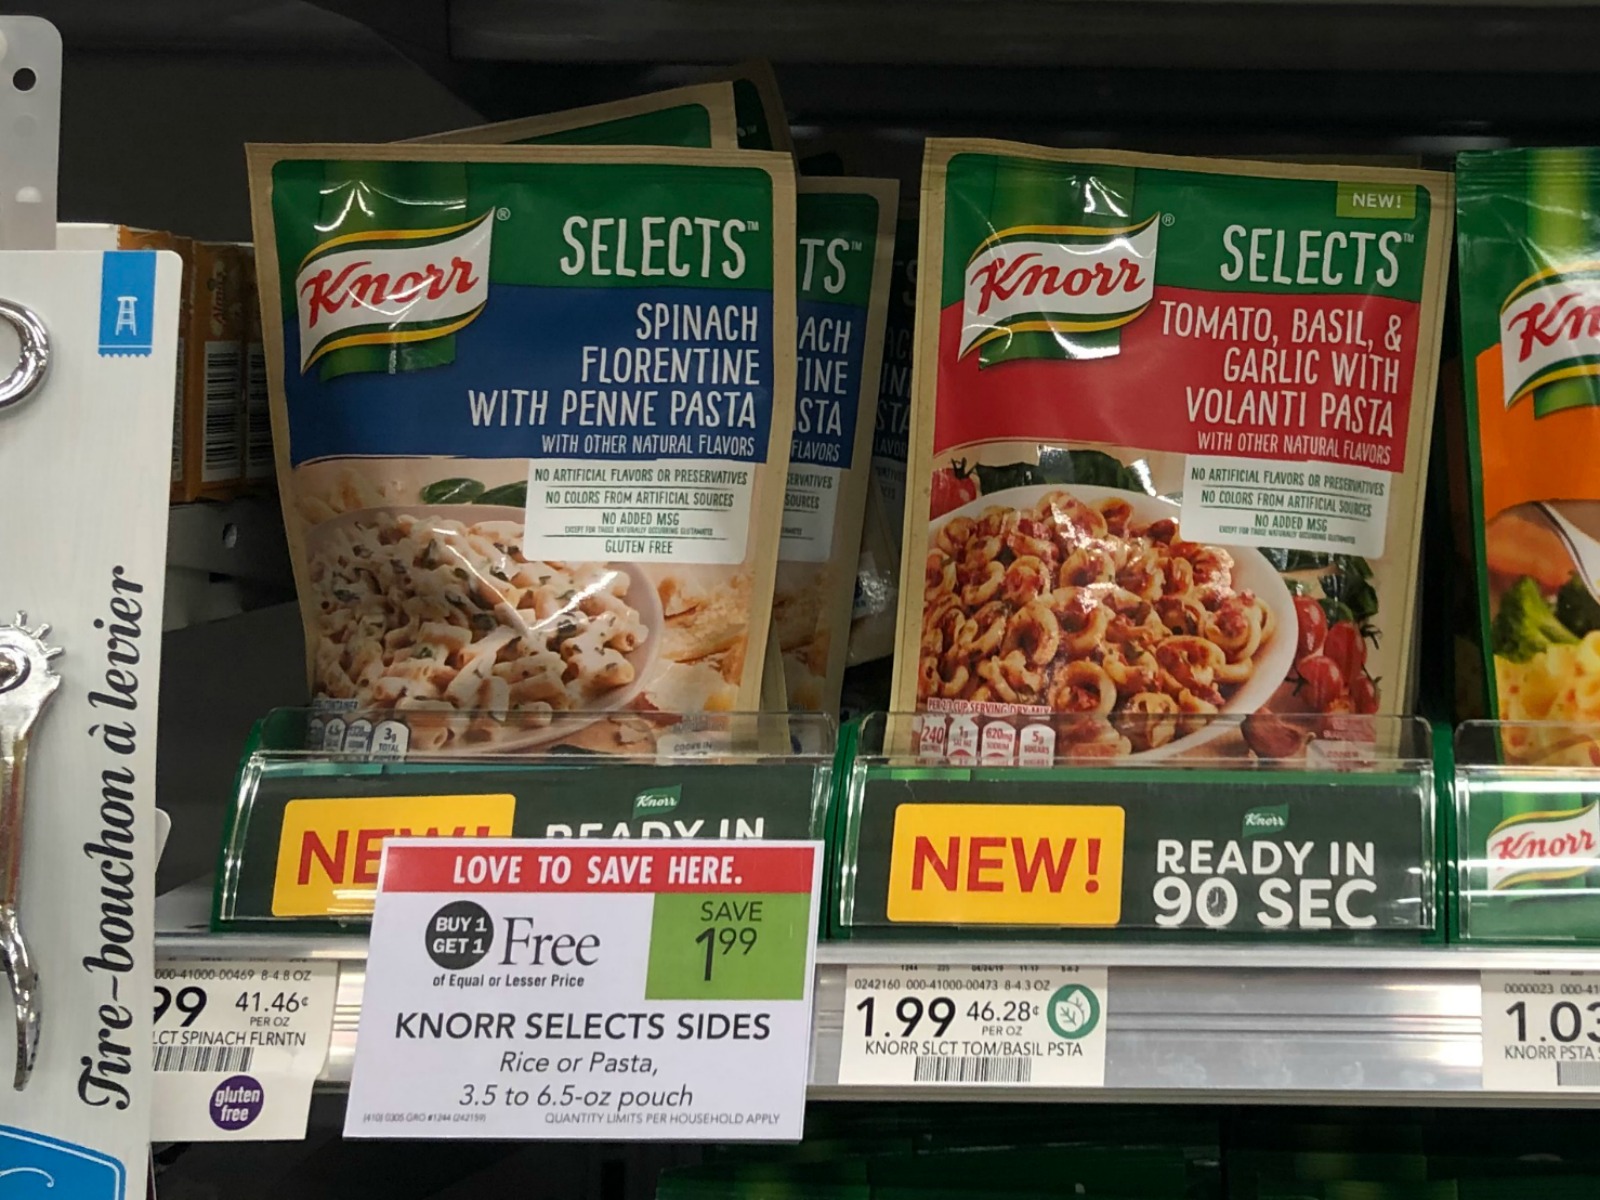 Stock Up On Your Favorite Knorr Sides, Selects & Ready To Heat Products During The BOGO Sale! on I Heart Publix